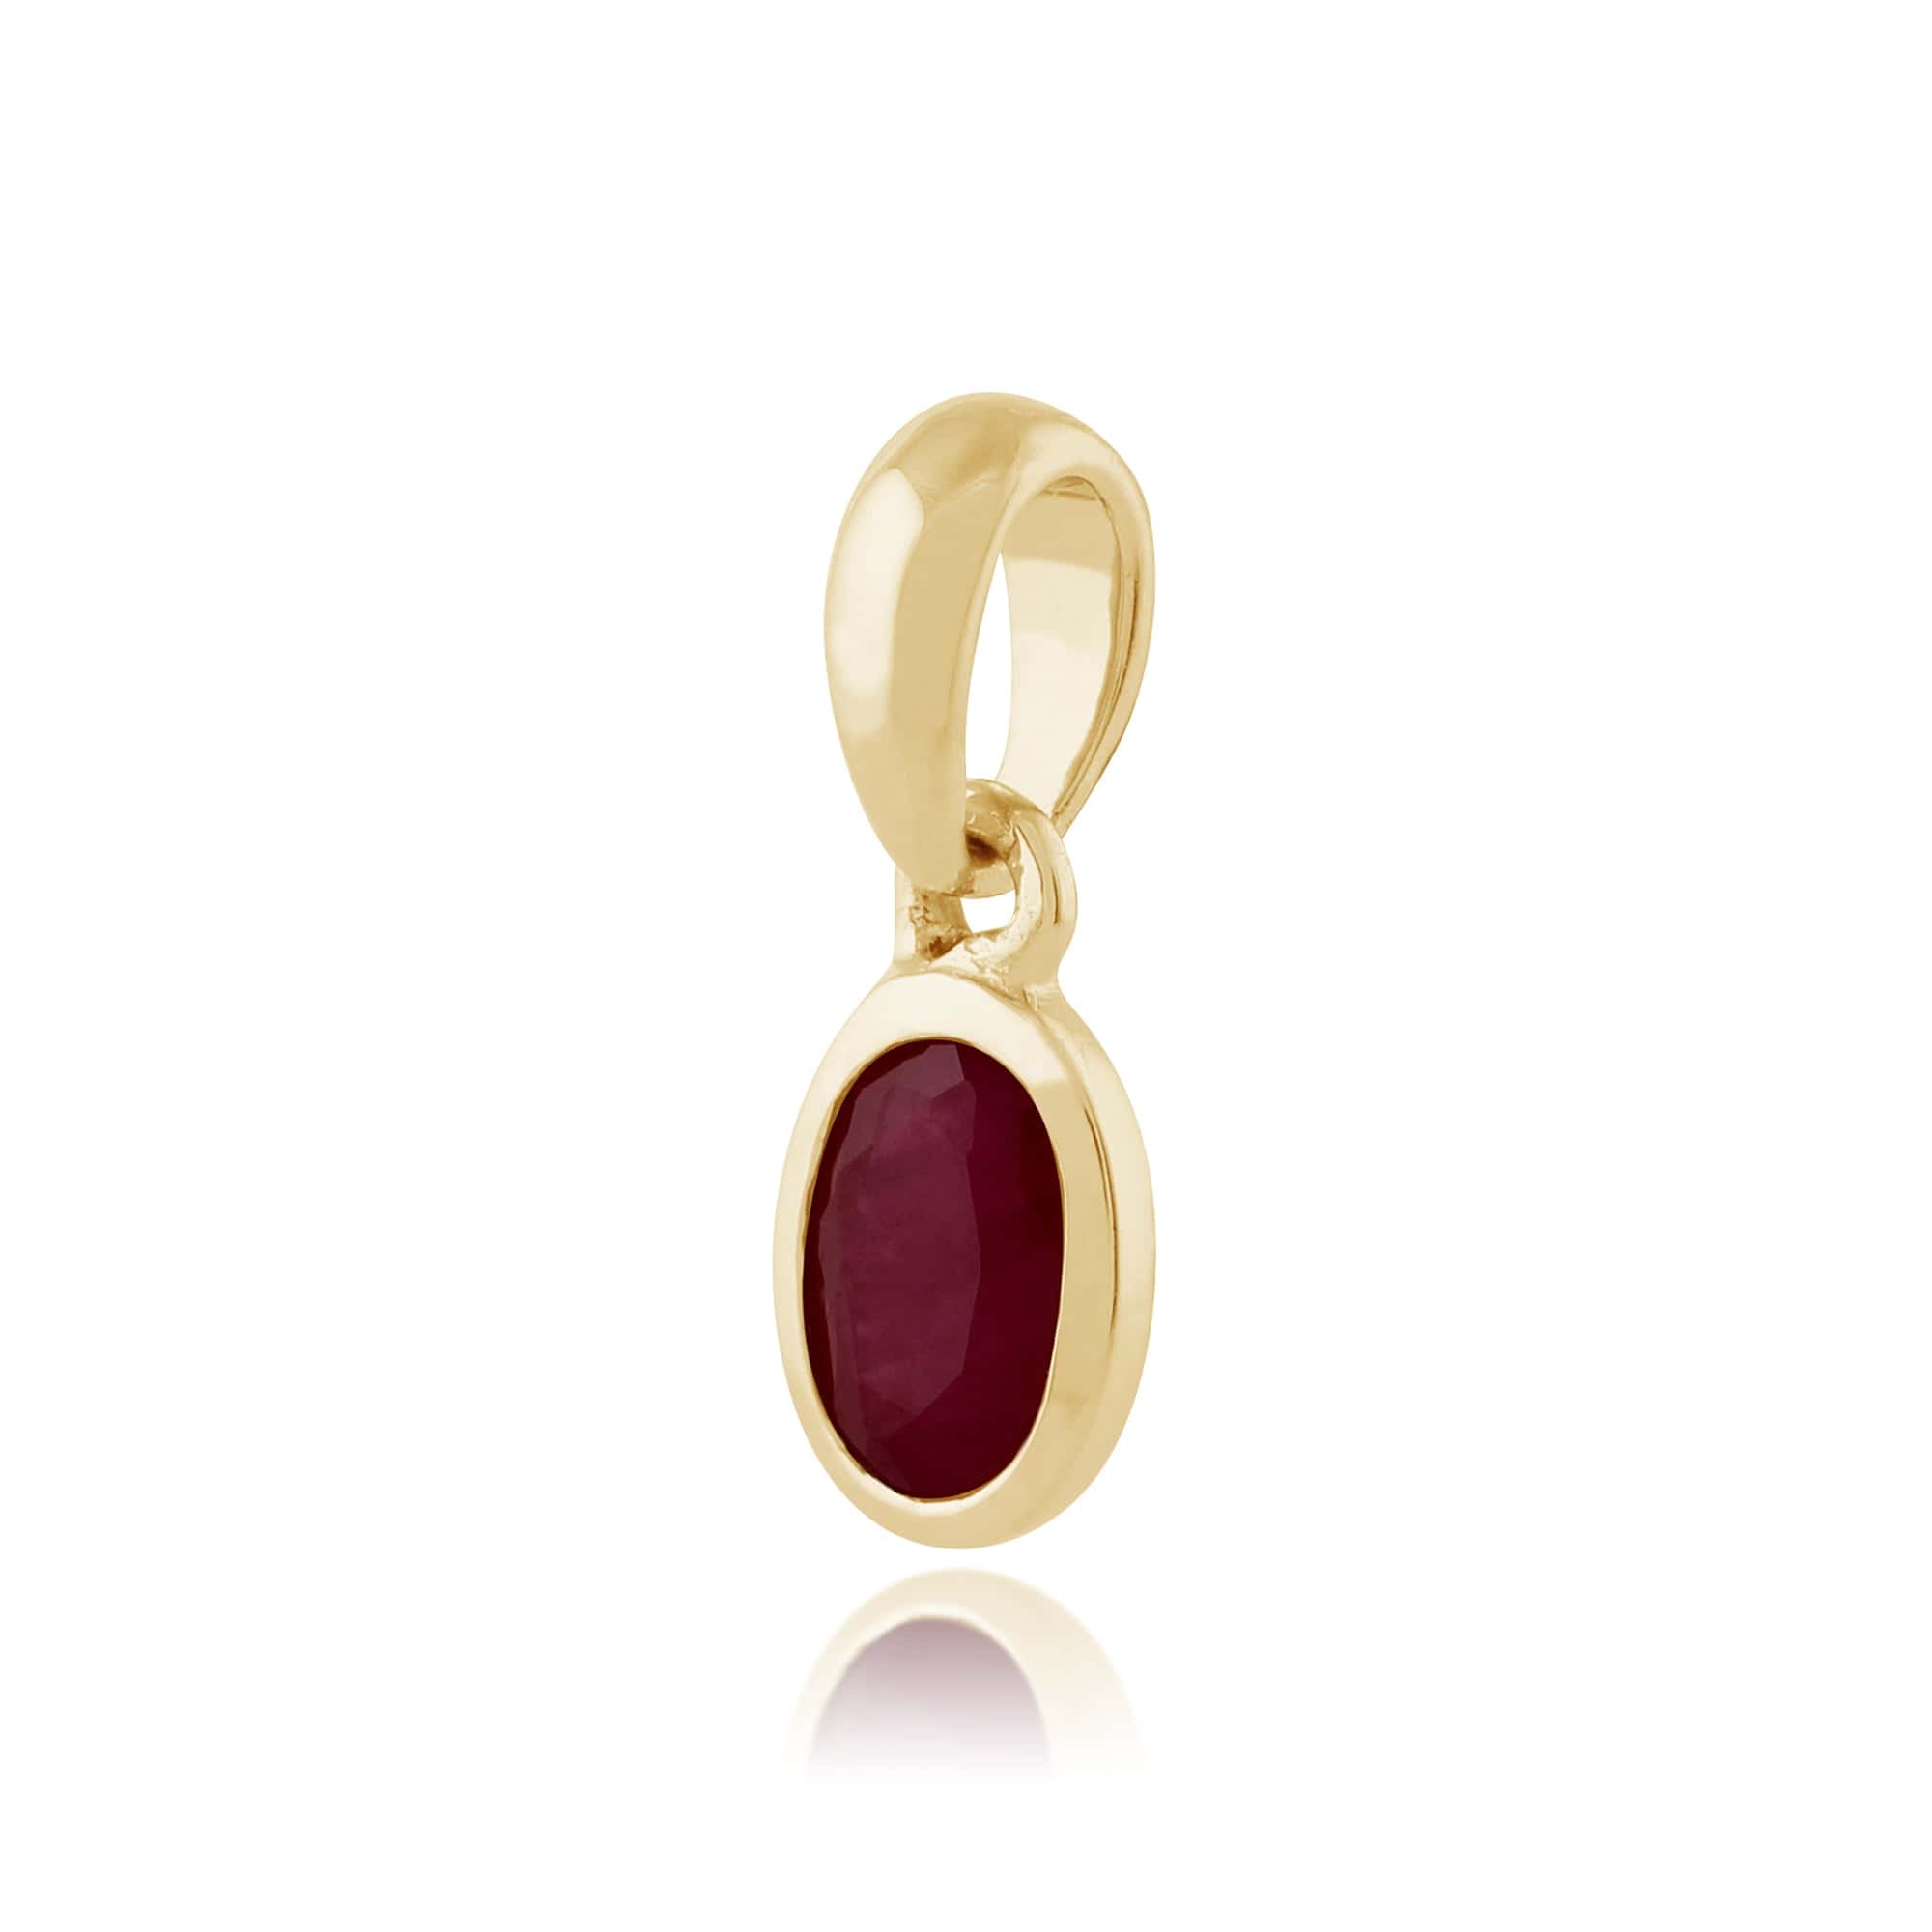 183P1120039 Classic Oval Ruby Pendant in 9ct Yellow Gold 2